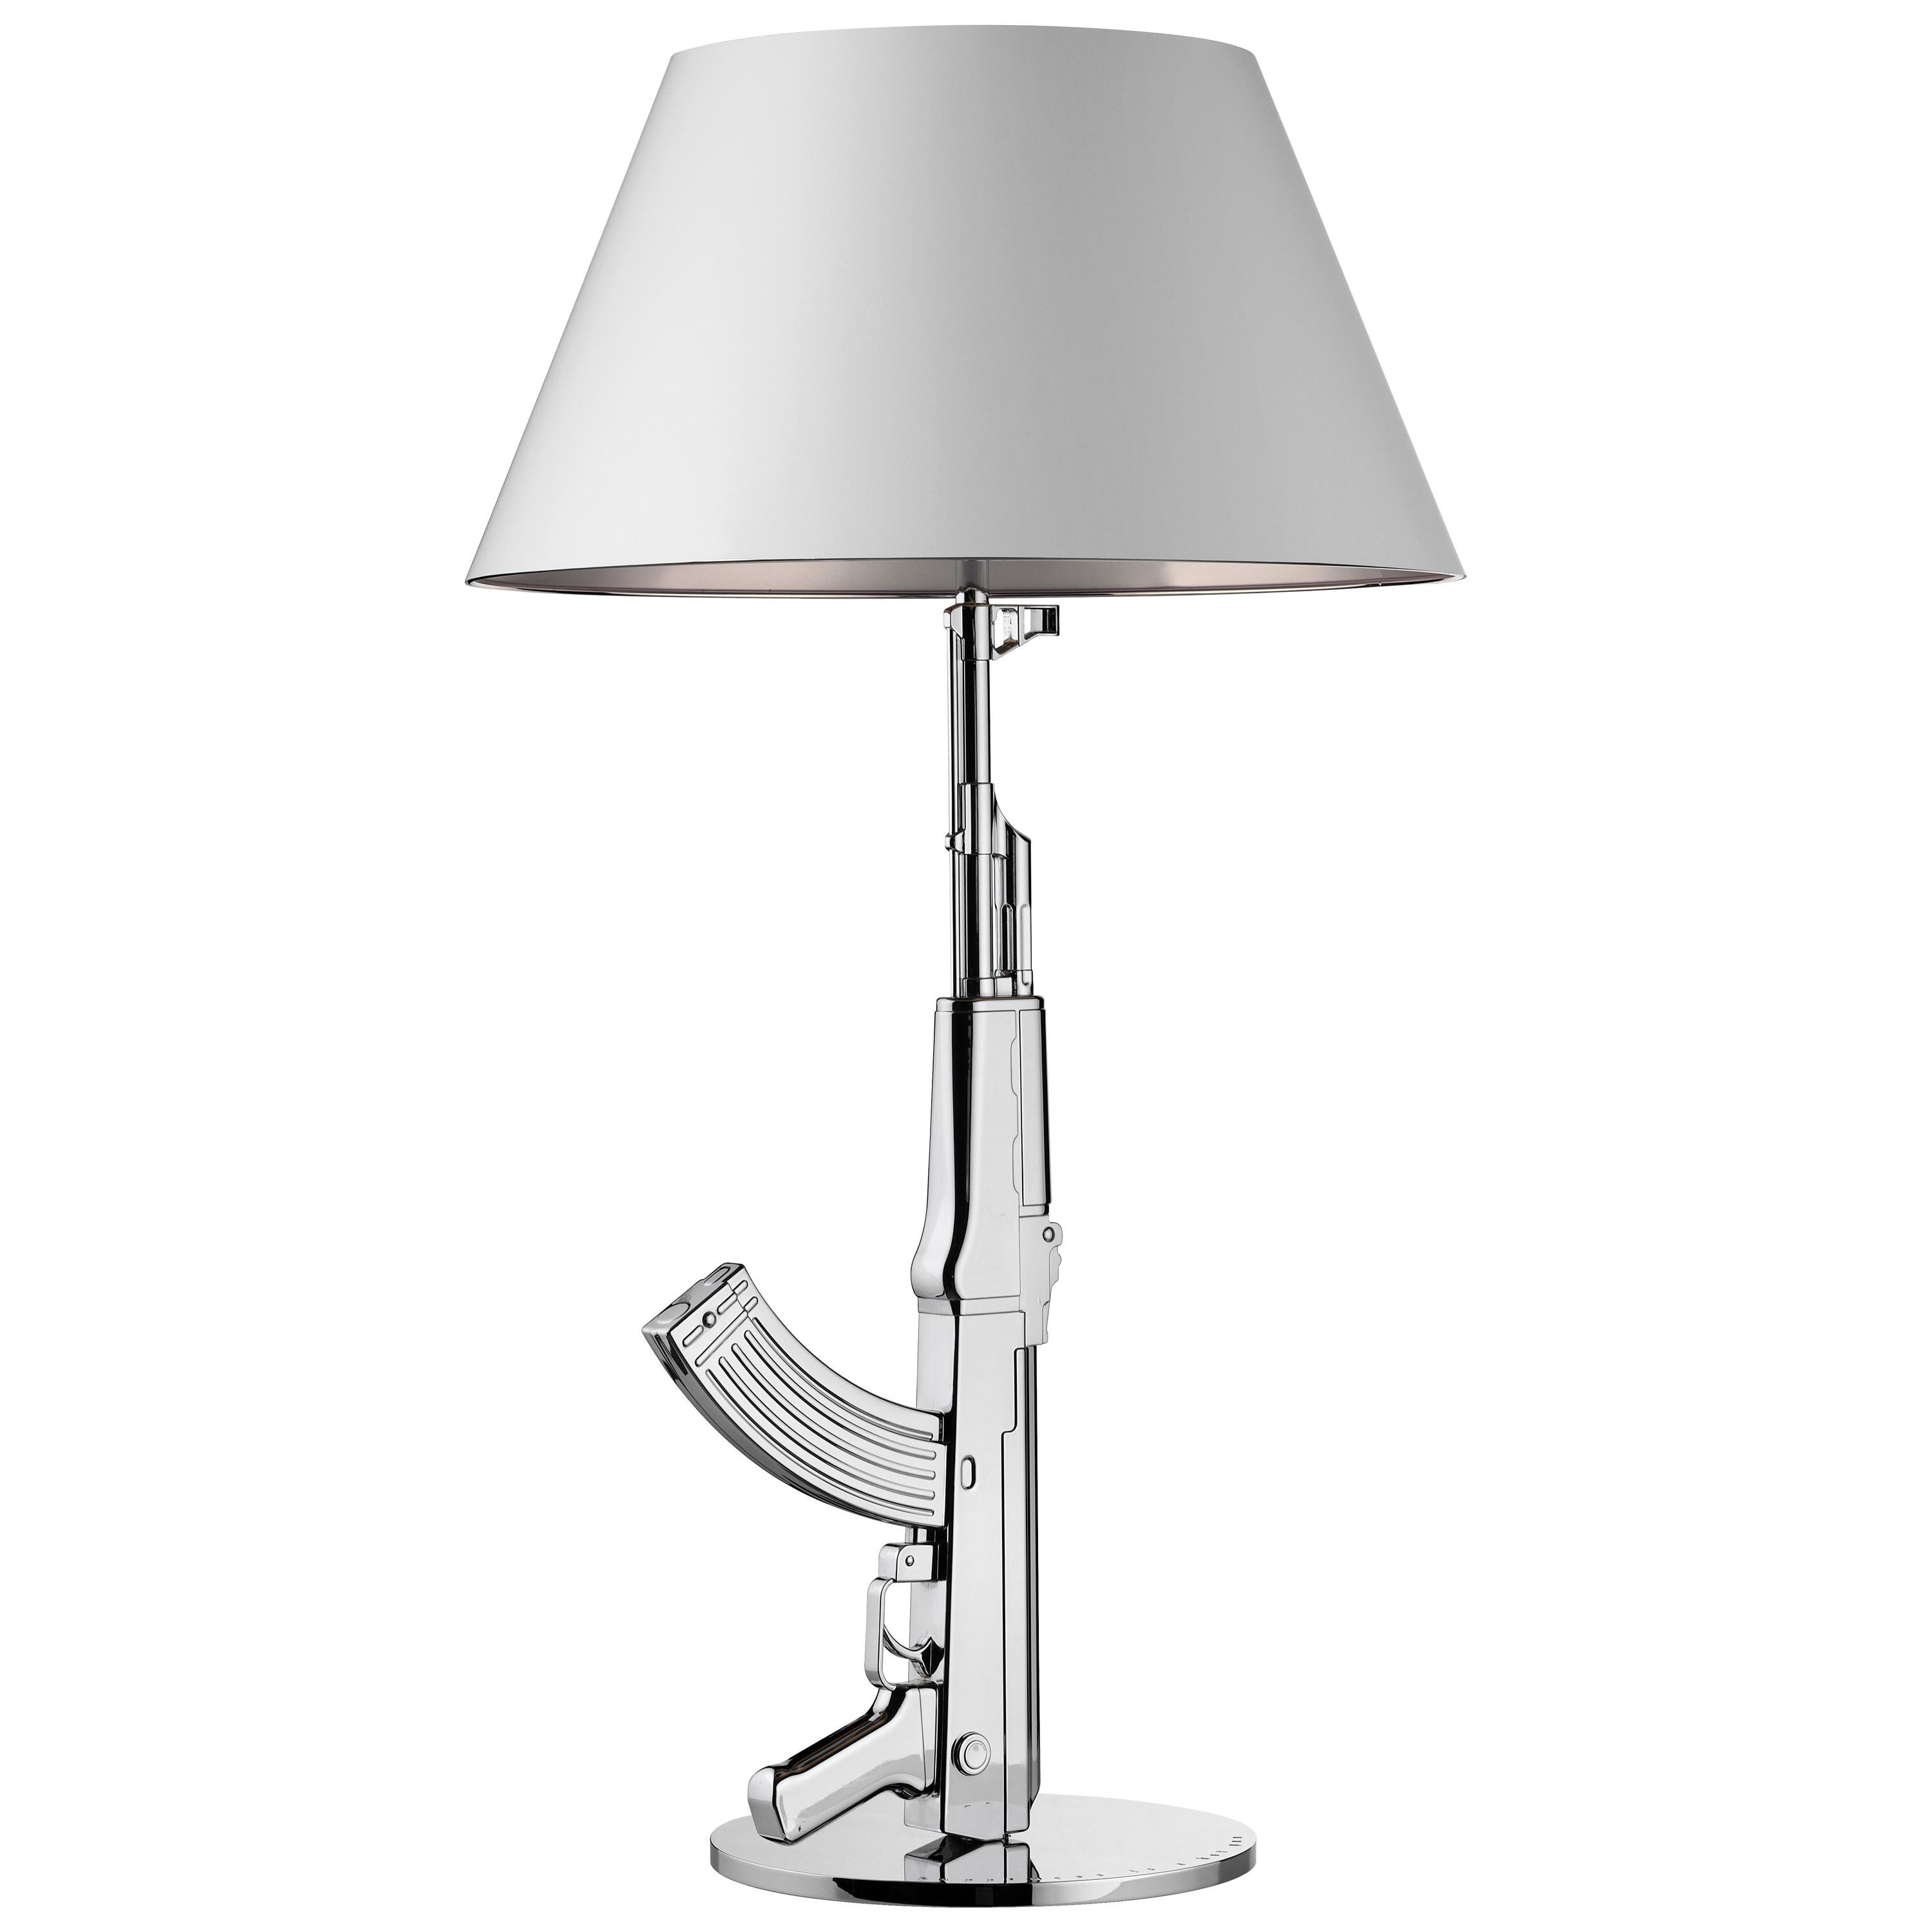 FLOS Guns Collection AK47 Table Lamp in Chrome by Philippe Starck